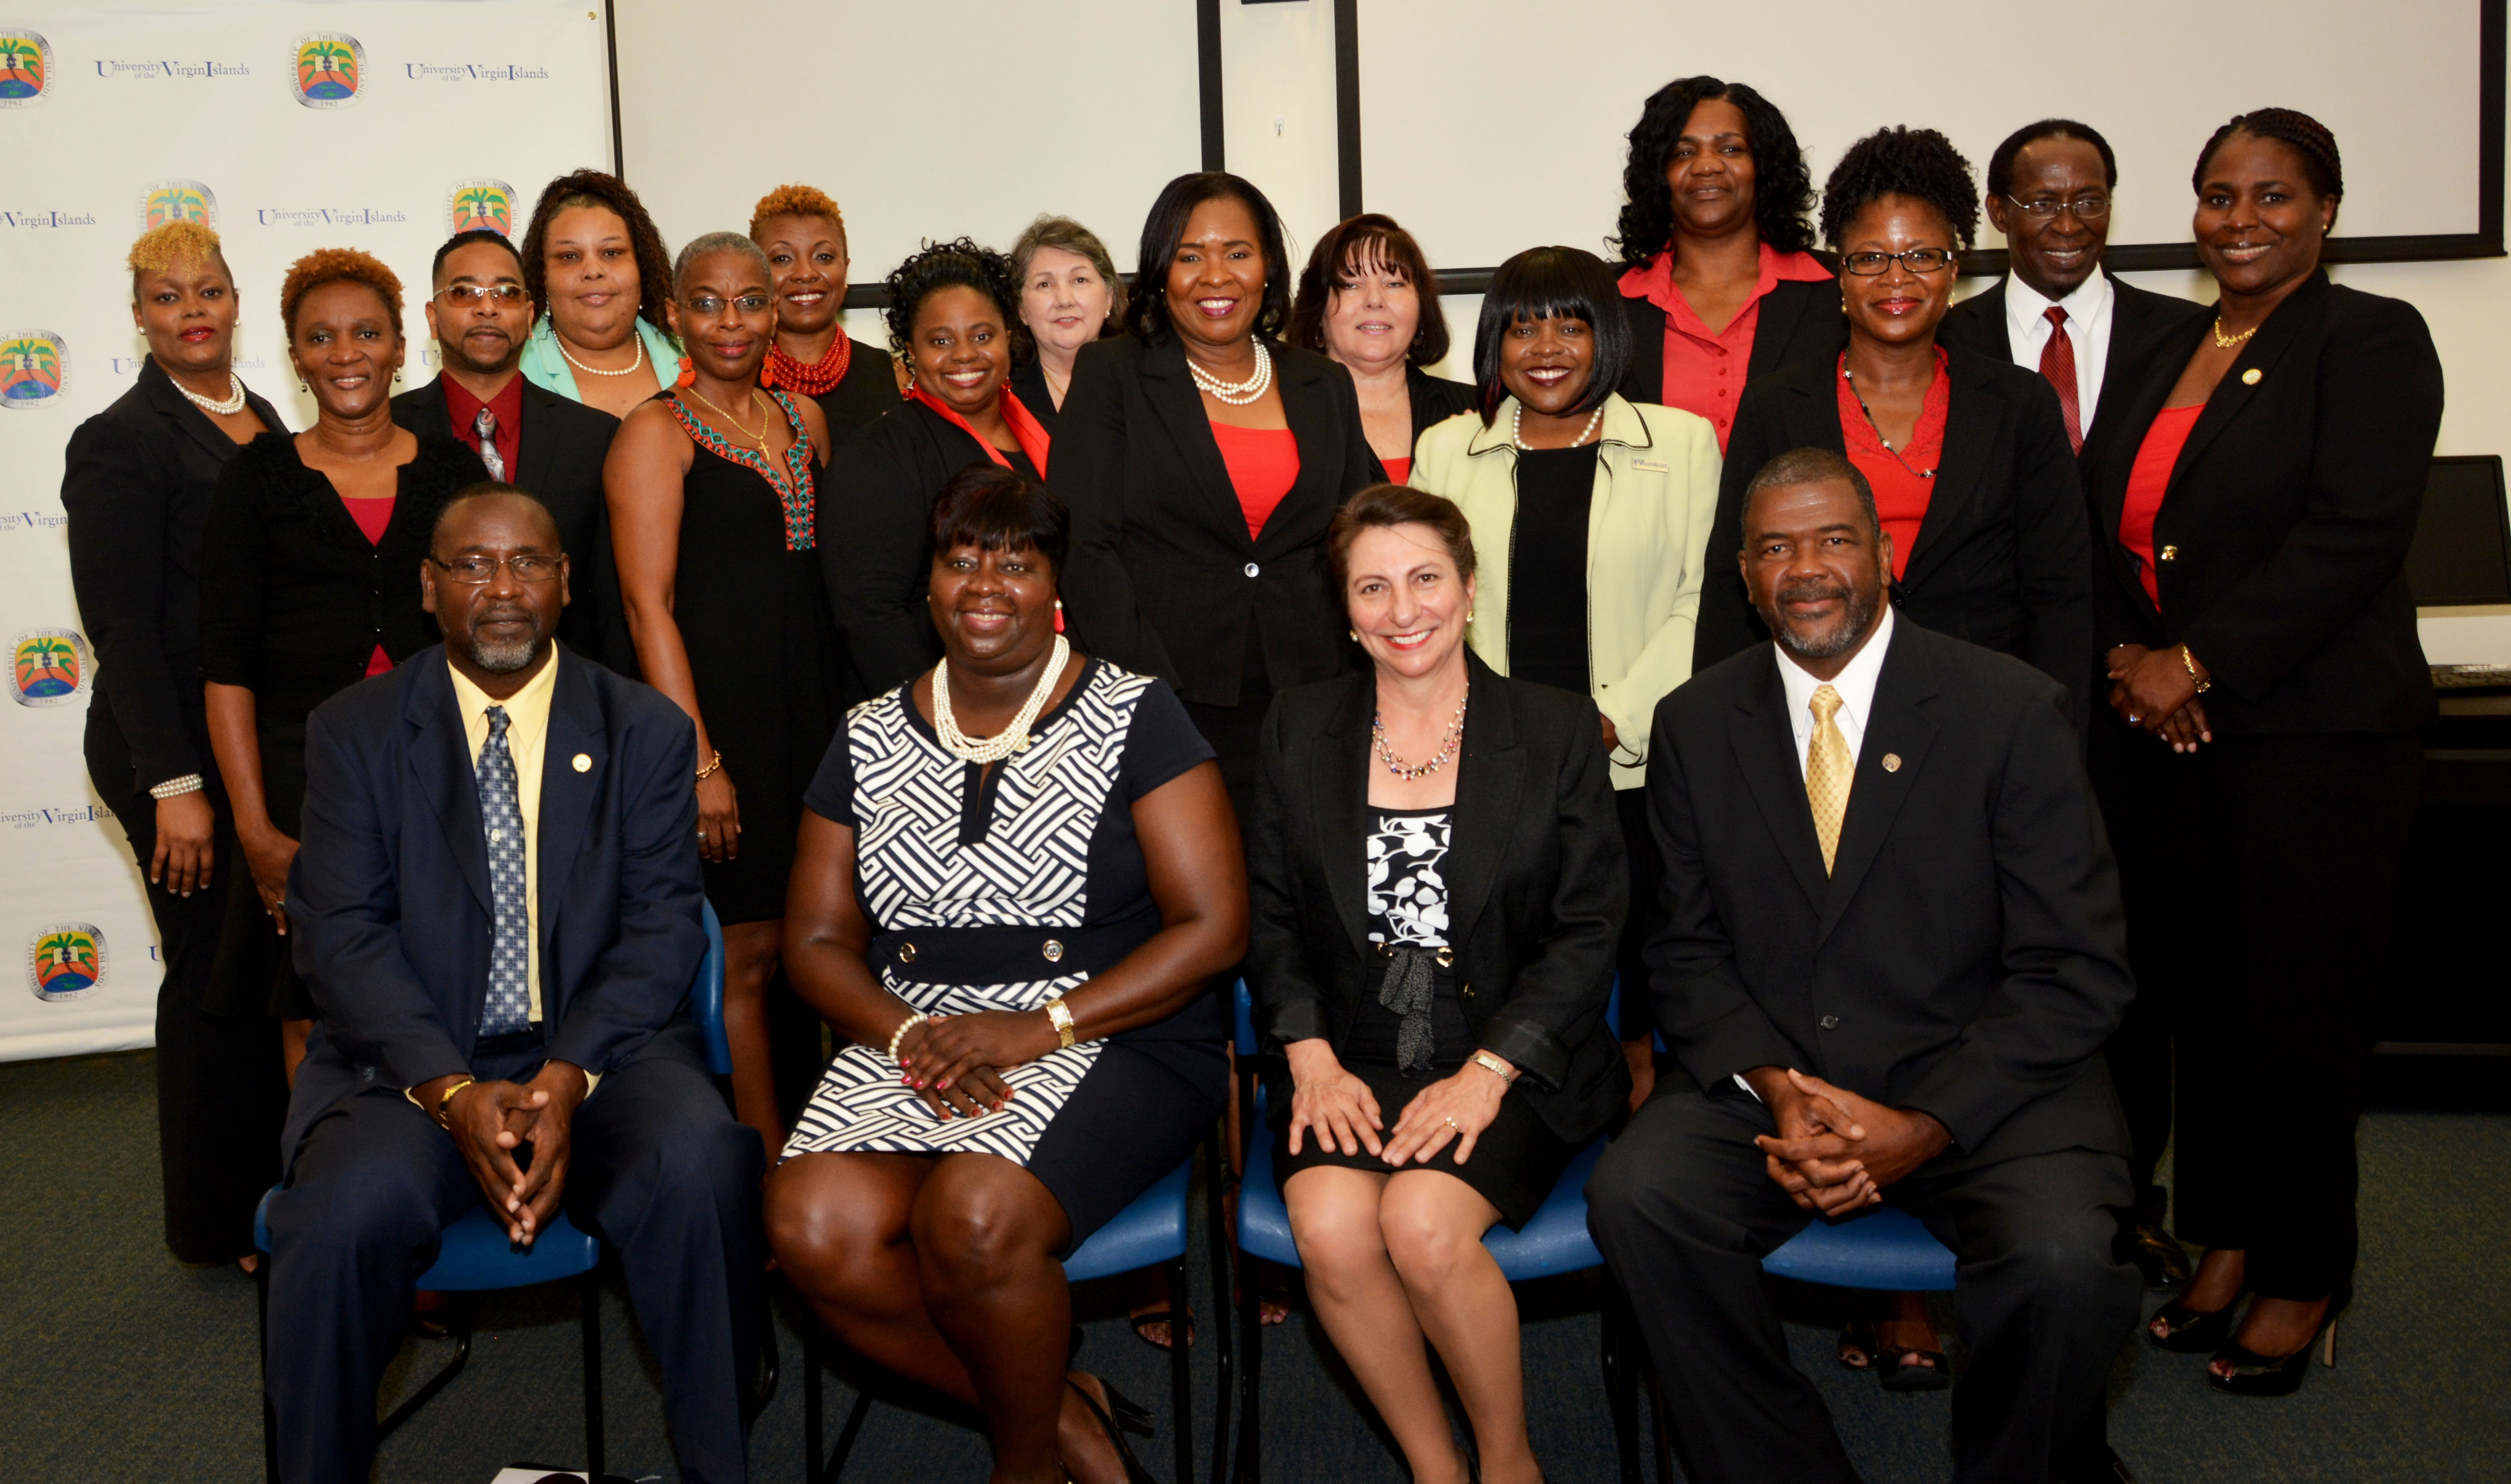 UVI graduates Certified Public Managers from St. Thomas